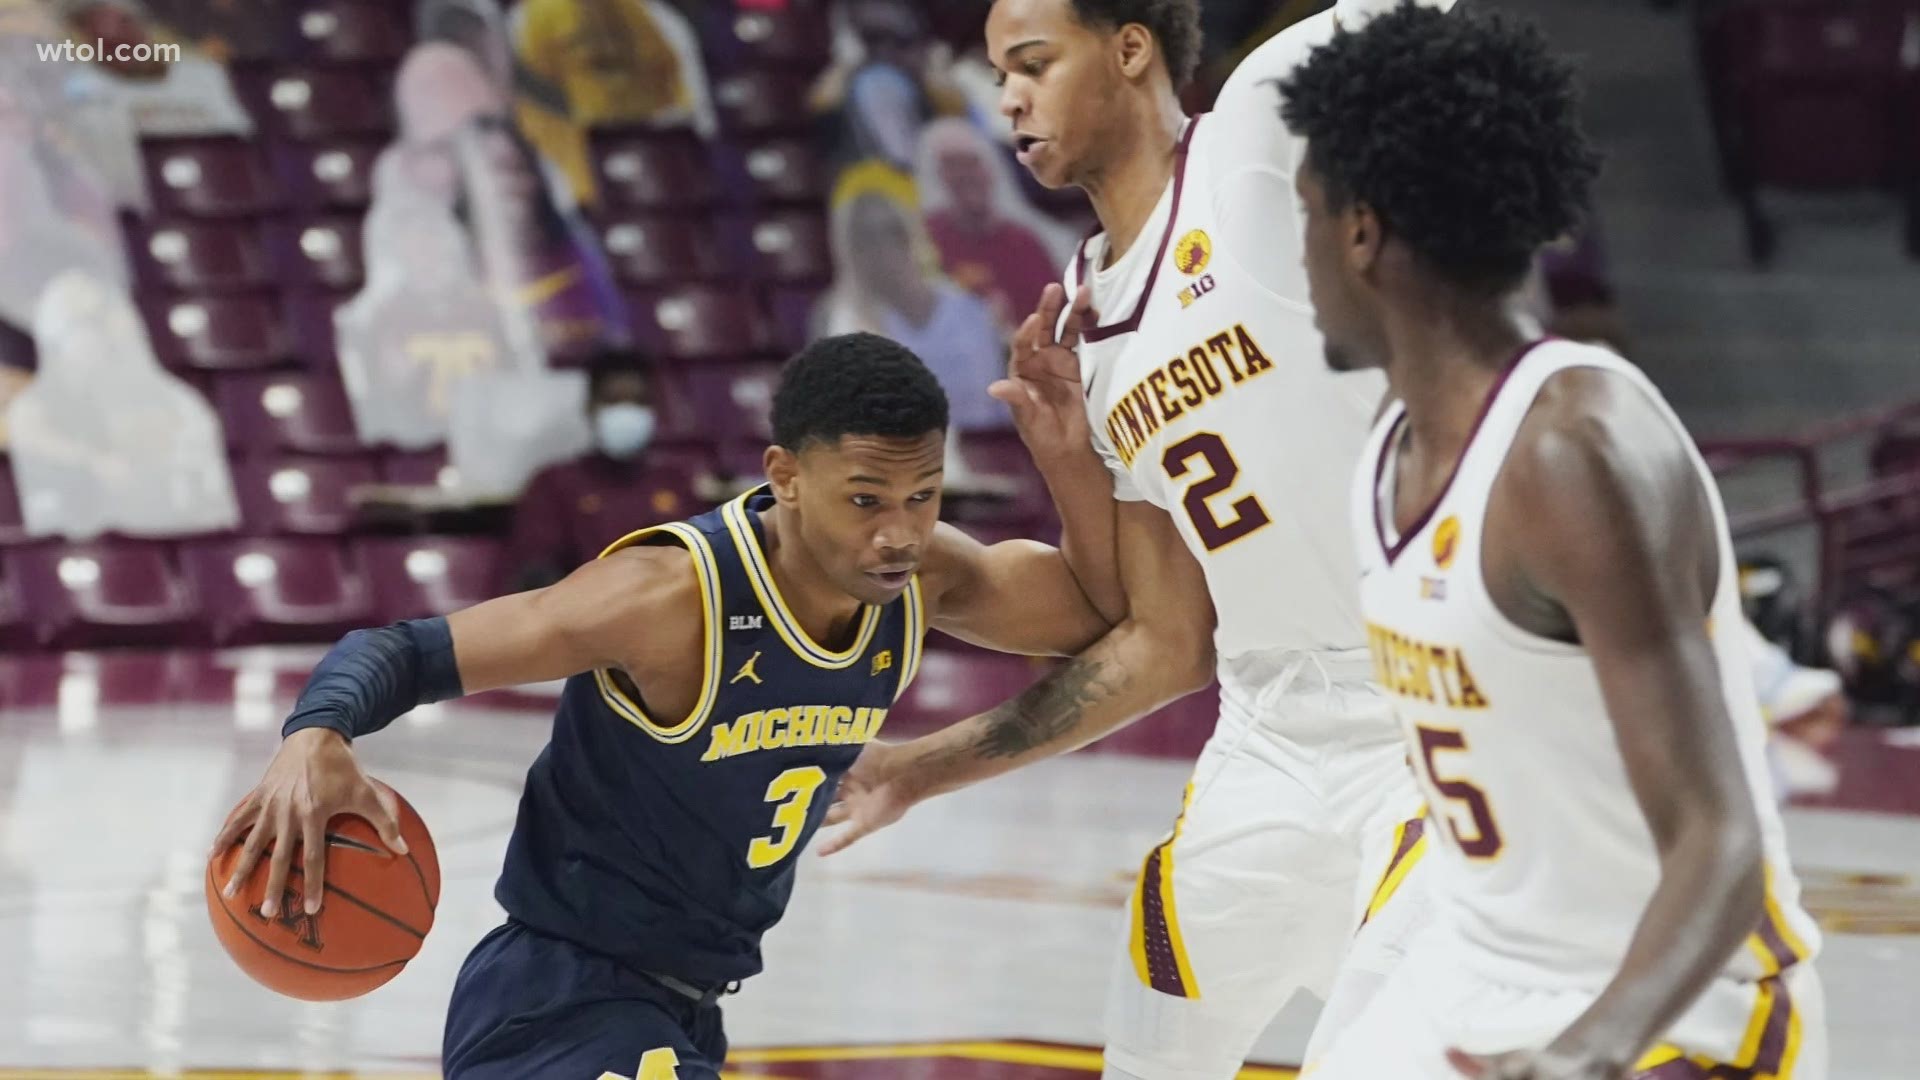 Jackson is back home in Toledo and spent some time training at Emmanuel Christian as he prepares to take on a bigger role next season with the Wolverines.